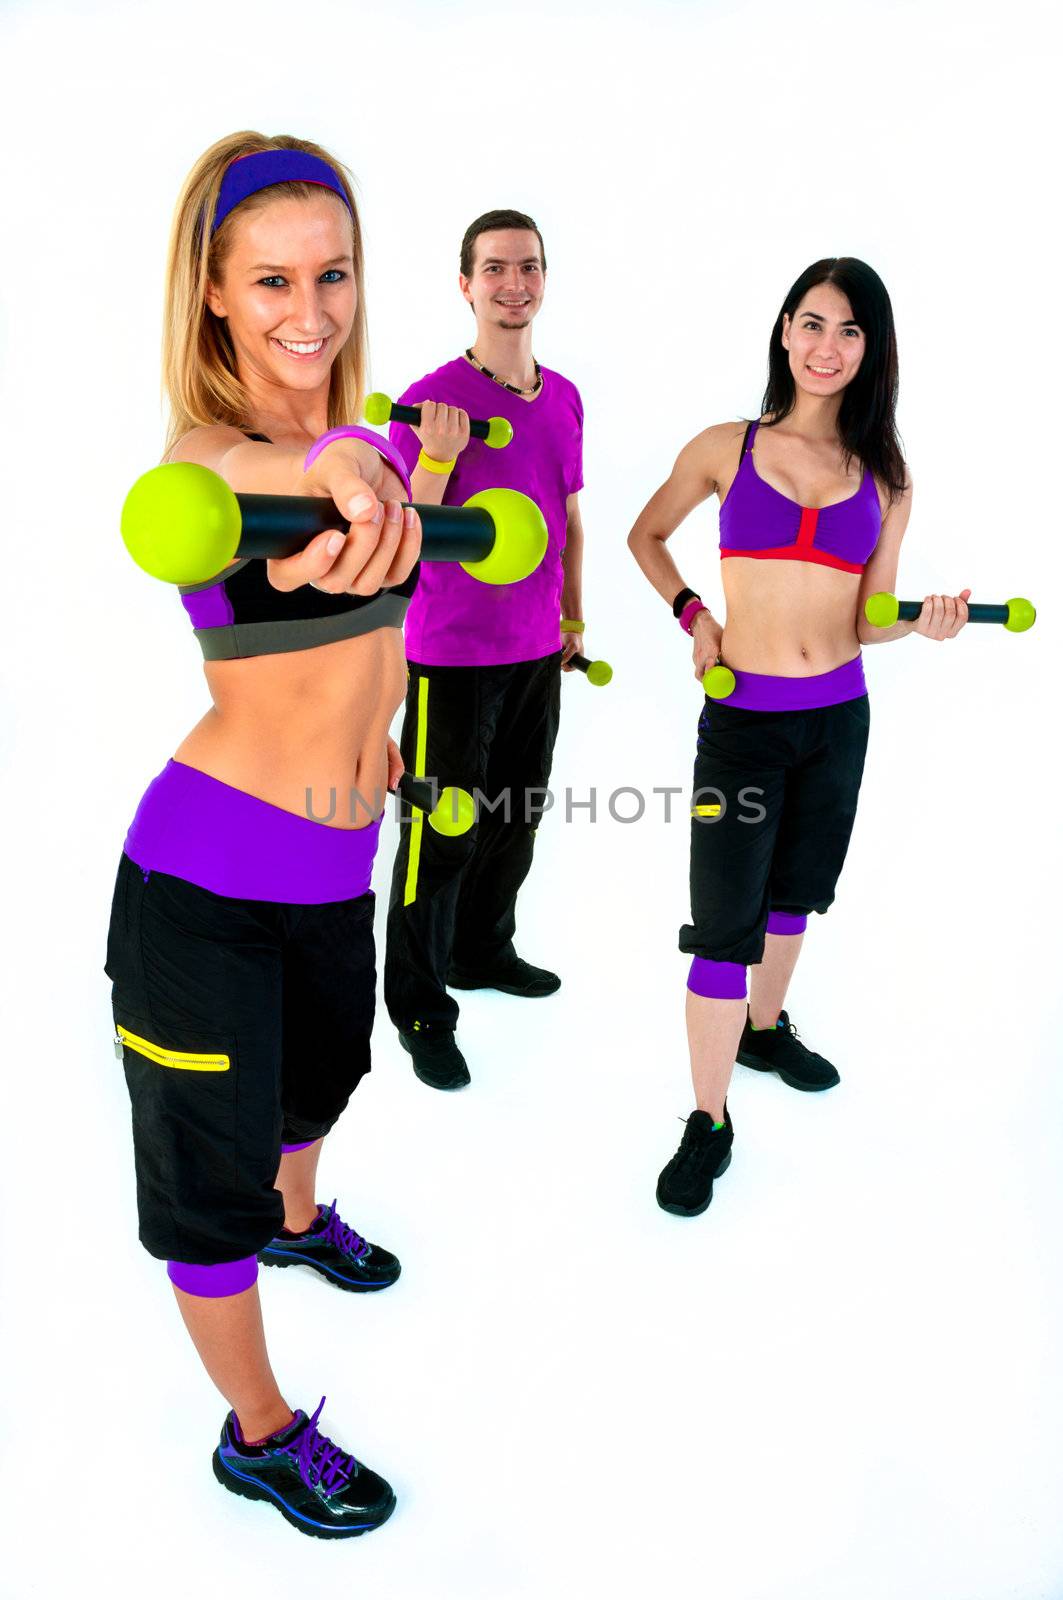 A group of young people training against white background